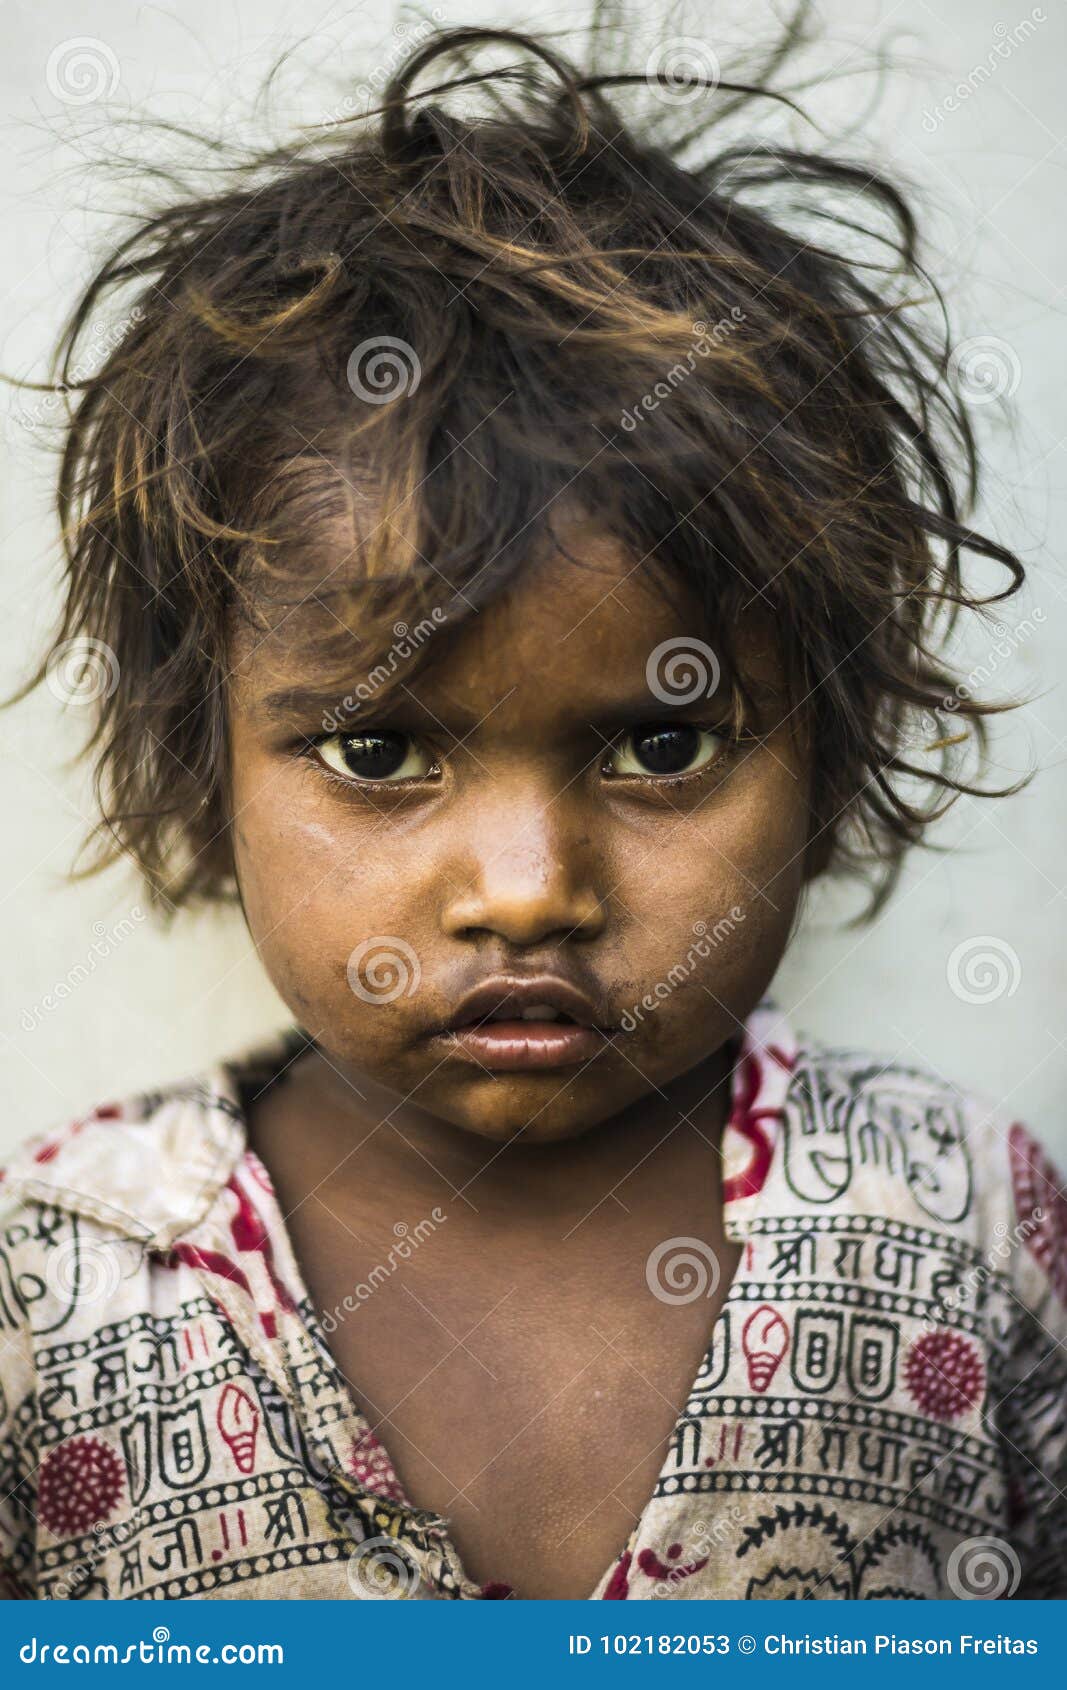 Indian street kid editorial stock photo. Image of culture - 102182053